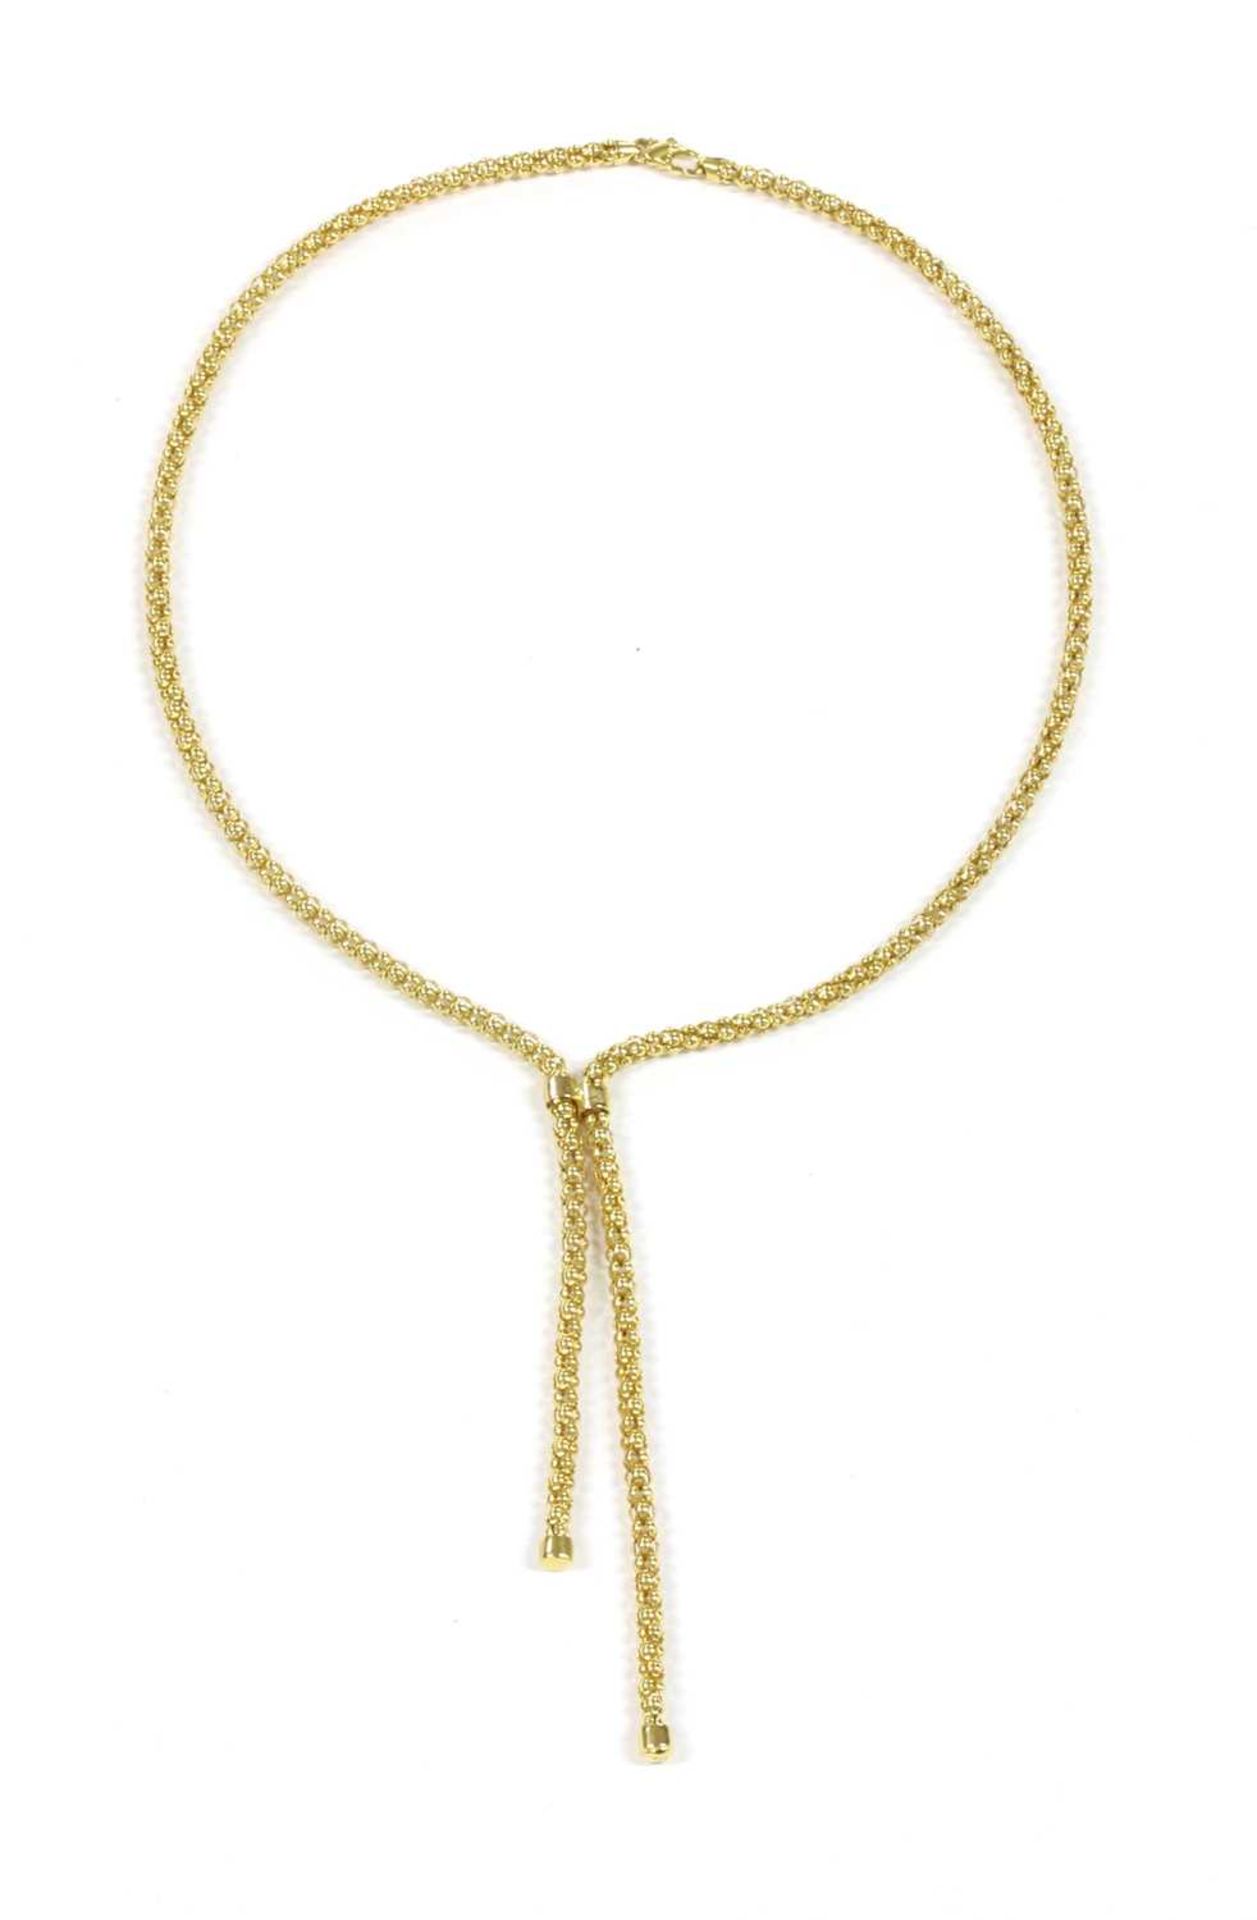 A 9ct gold popcorn link lariat-style tassel necklace,